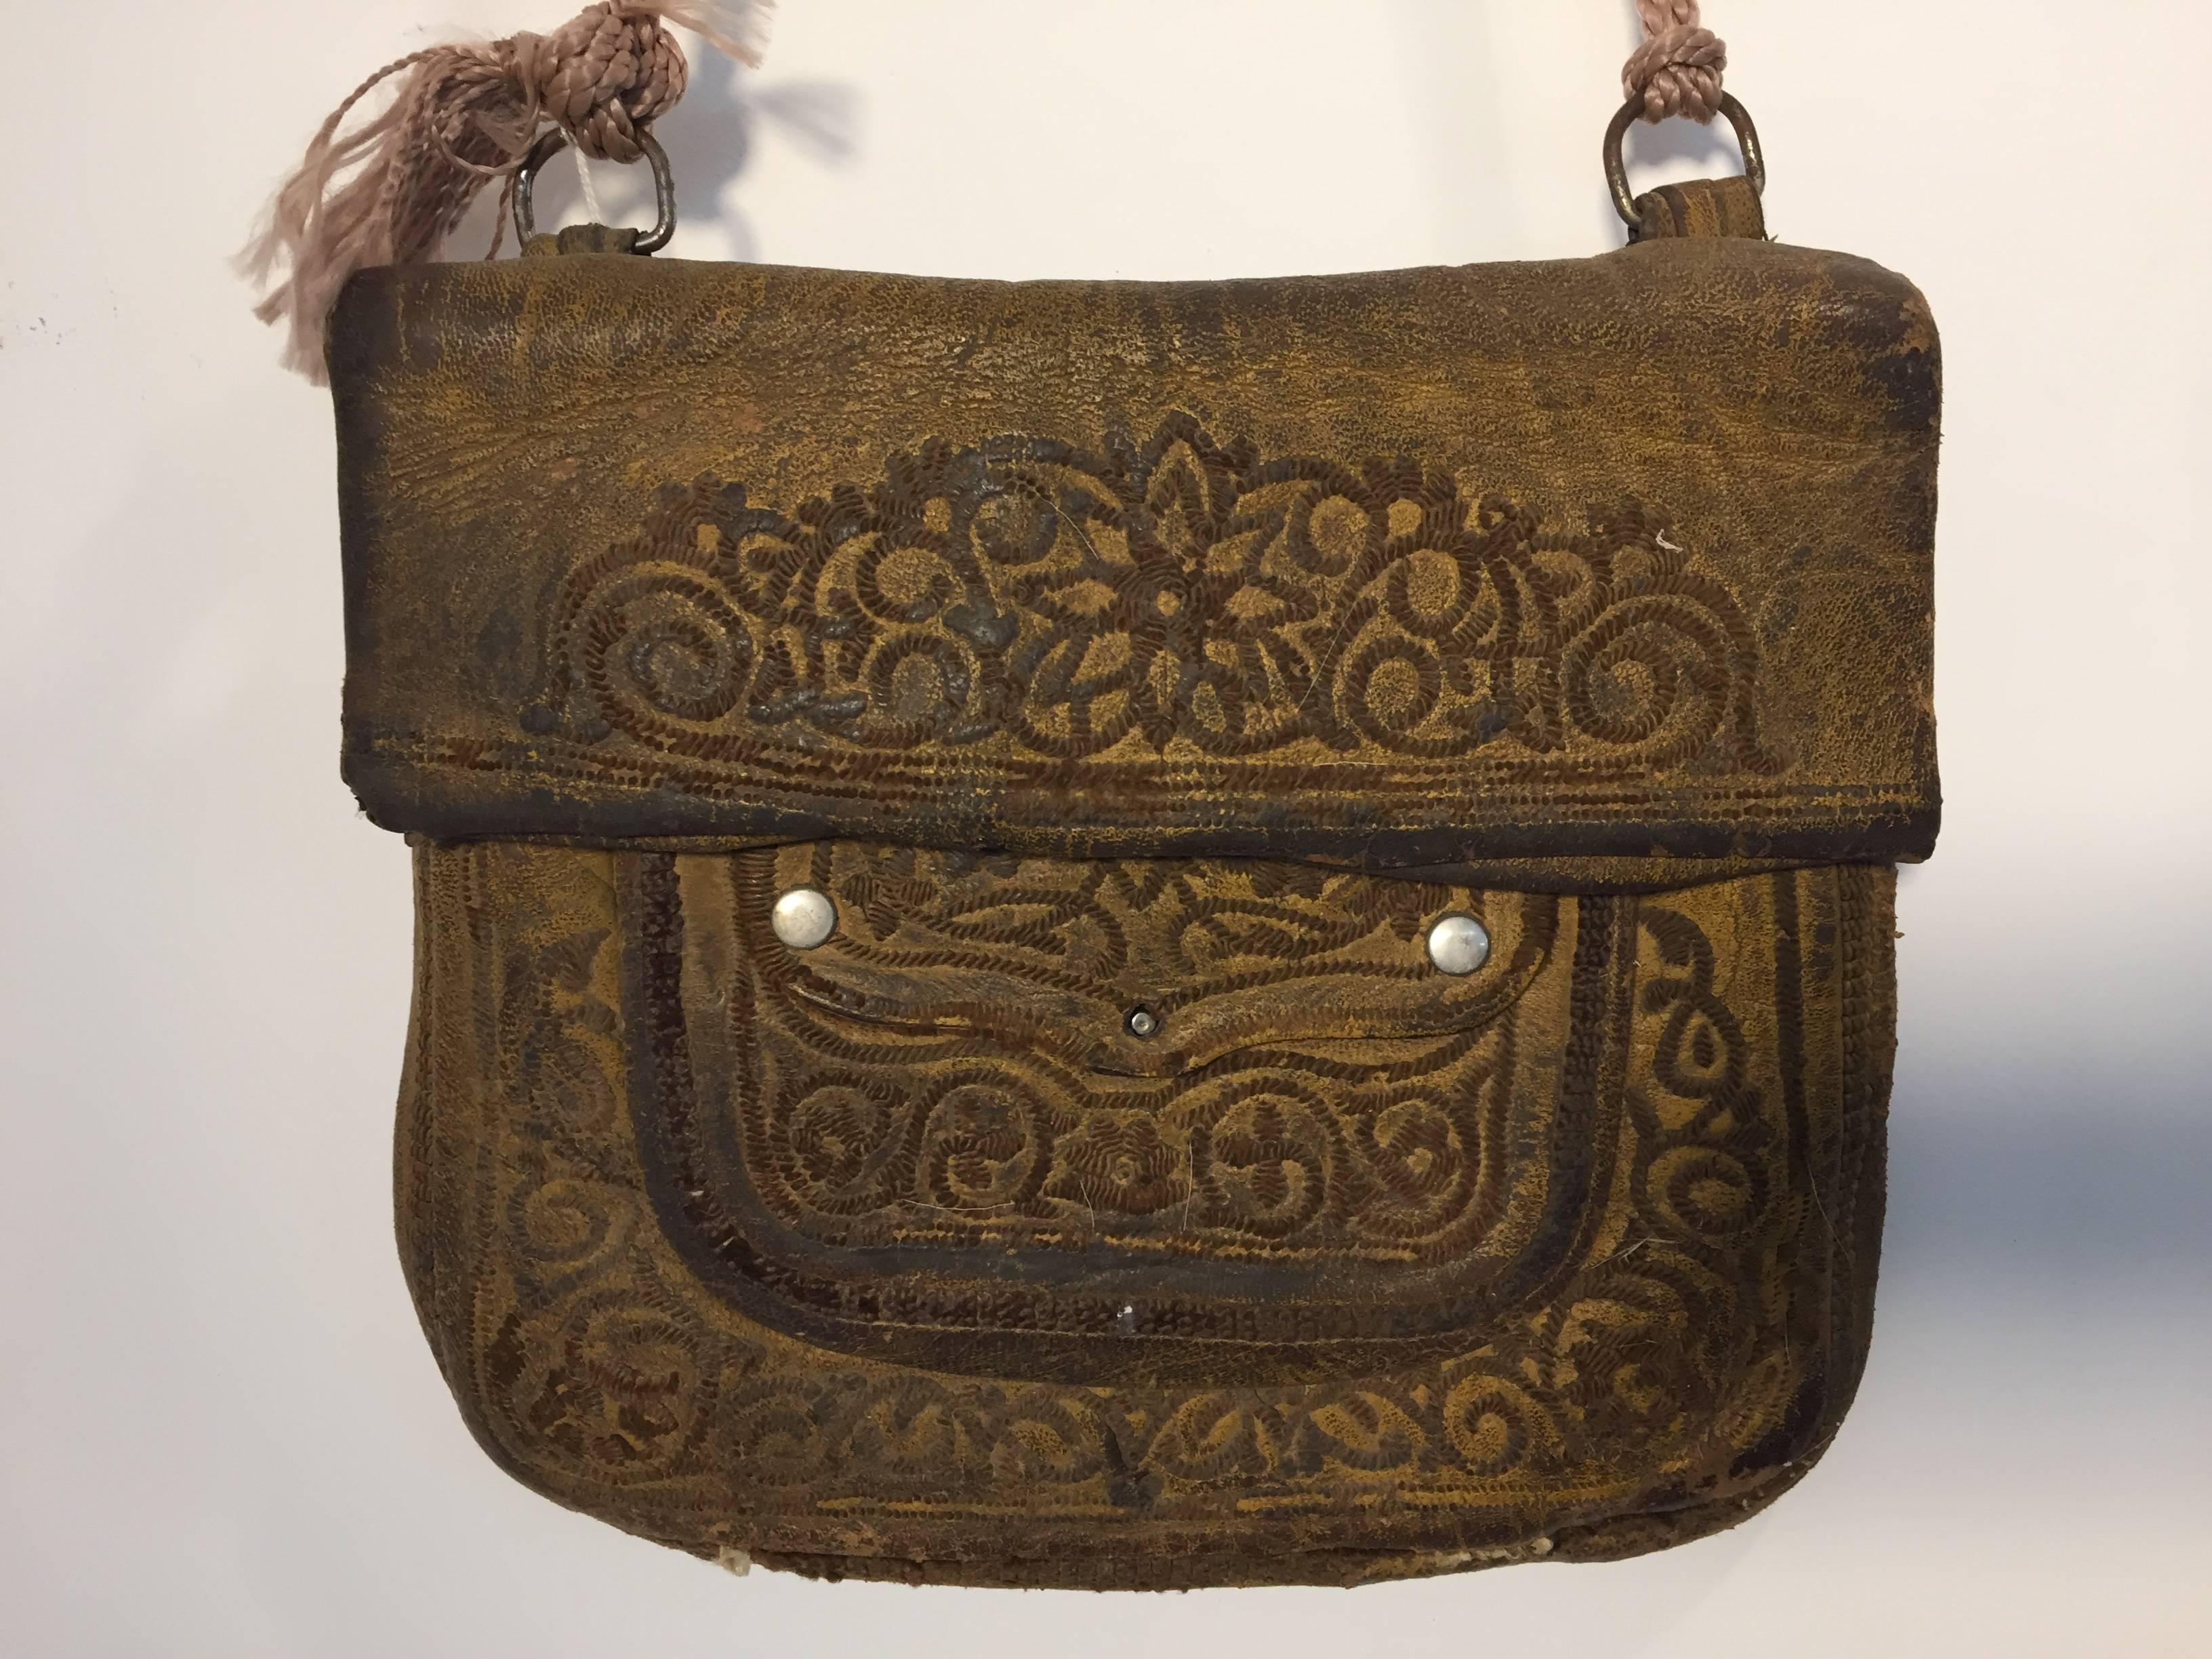 Old leather African Moroccan satchel bag with flap decorated with tribal embroideries.
Hand-tooled in Marrakech, this is an old antique shoulder slim bag, merchants in Morocco when travelling used this bag under their coat to put their money and